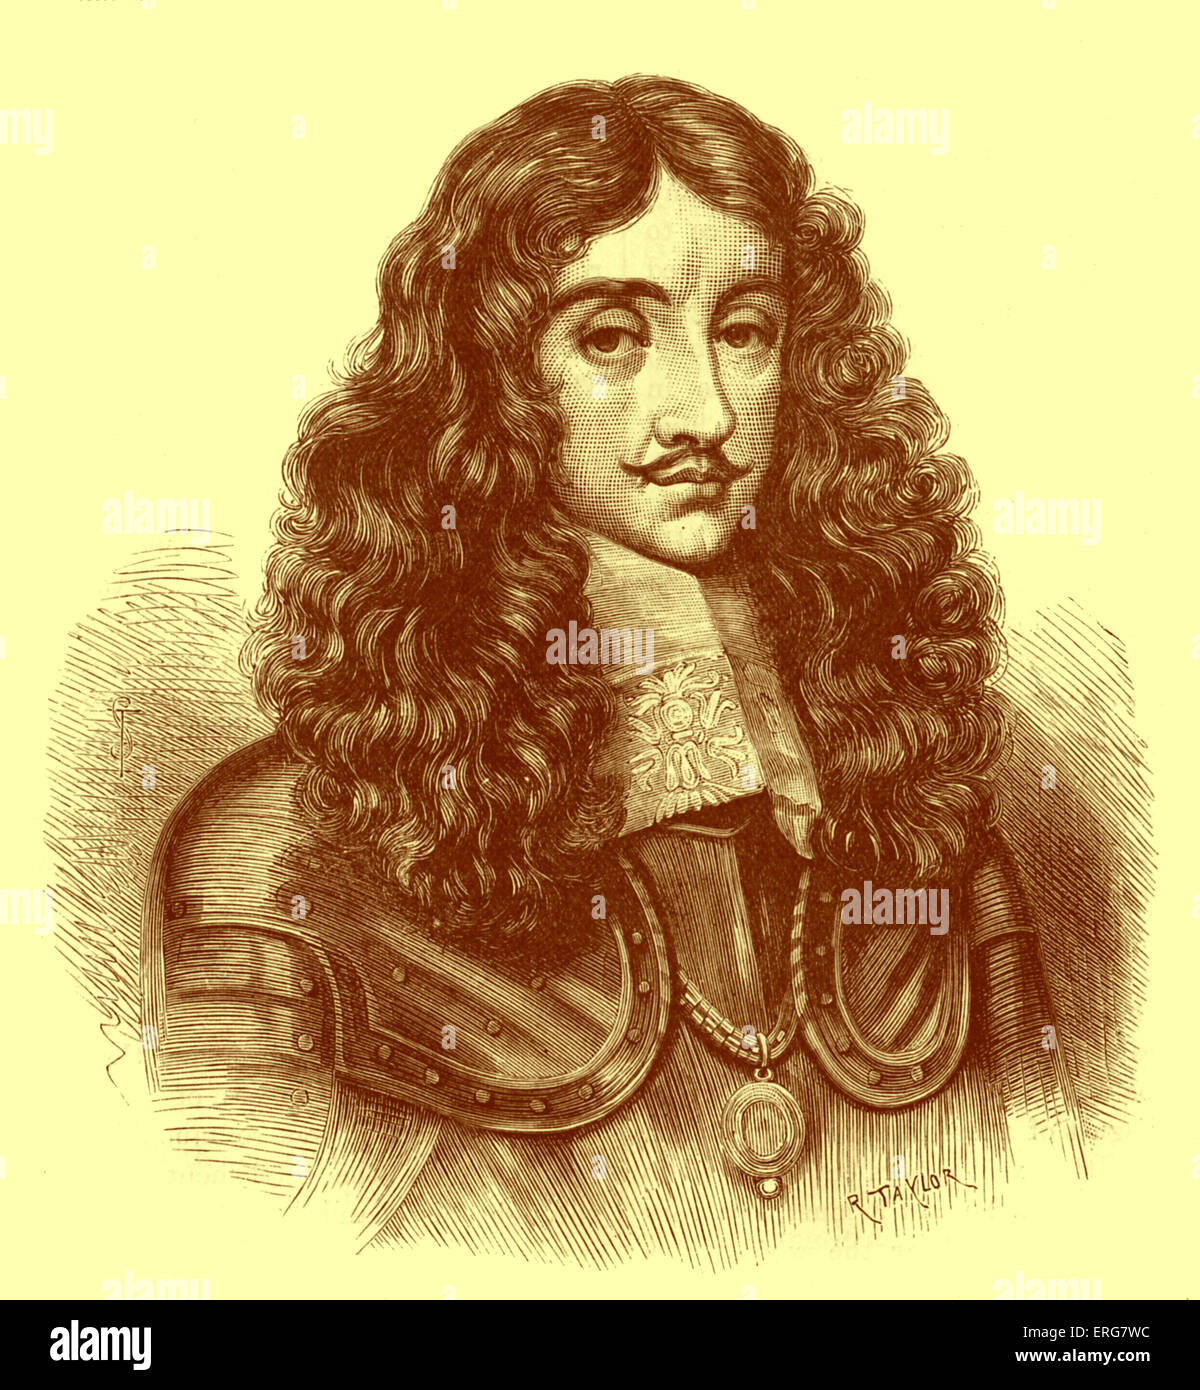 Charles II. Portrait of the King of England, King of Scots, and King of Ireland, reigned from 1660 - 1685.  Charles II: b. 29 Stock Photo